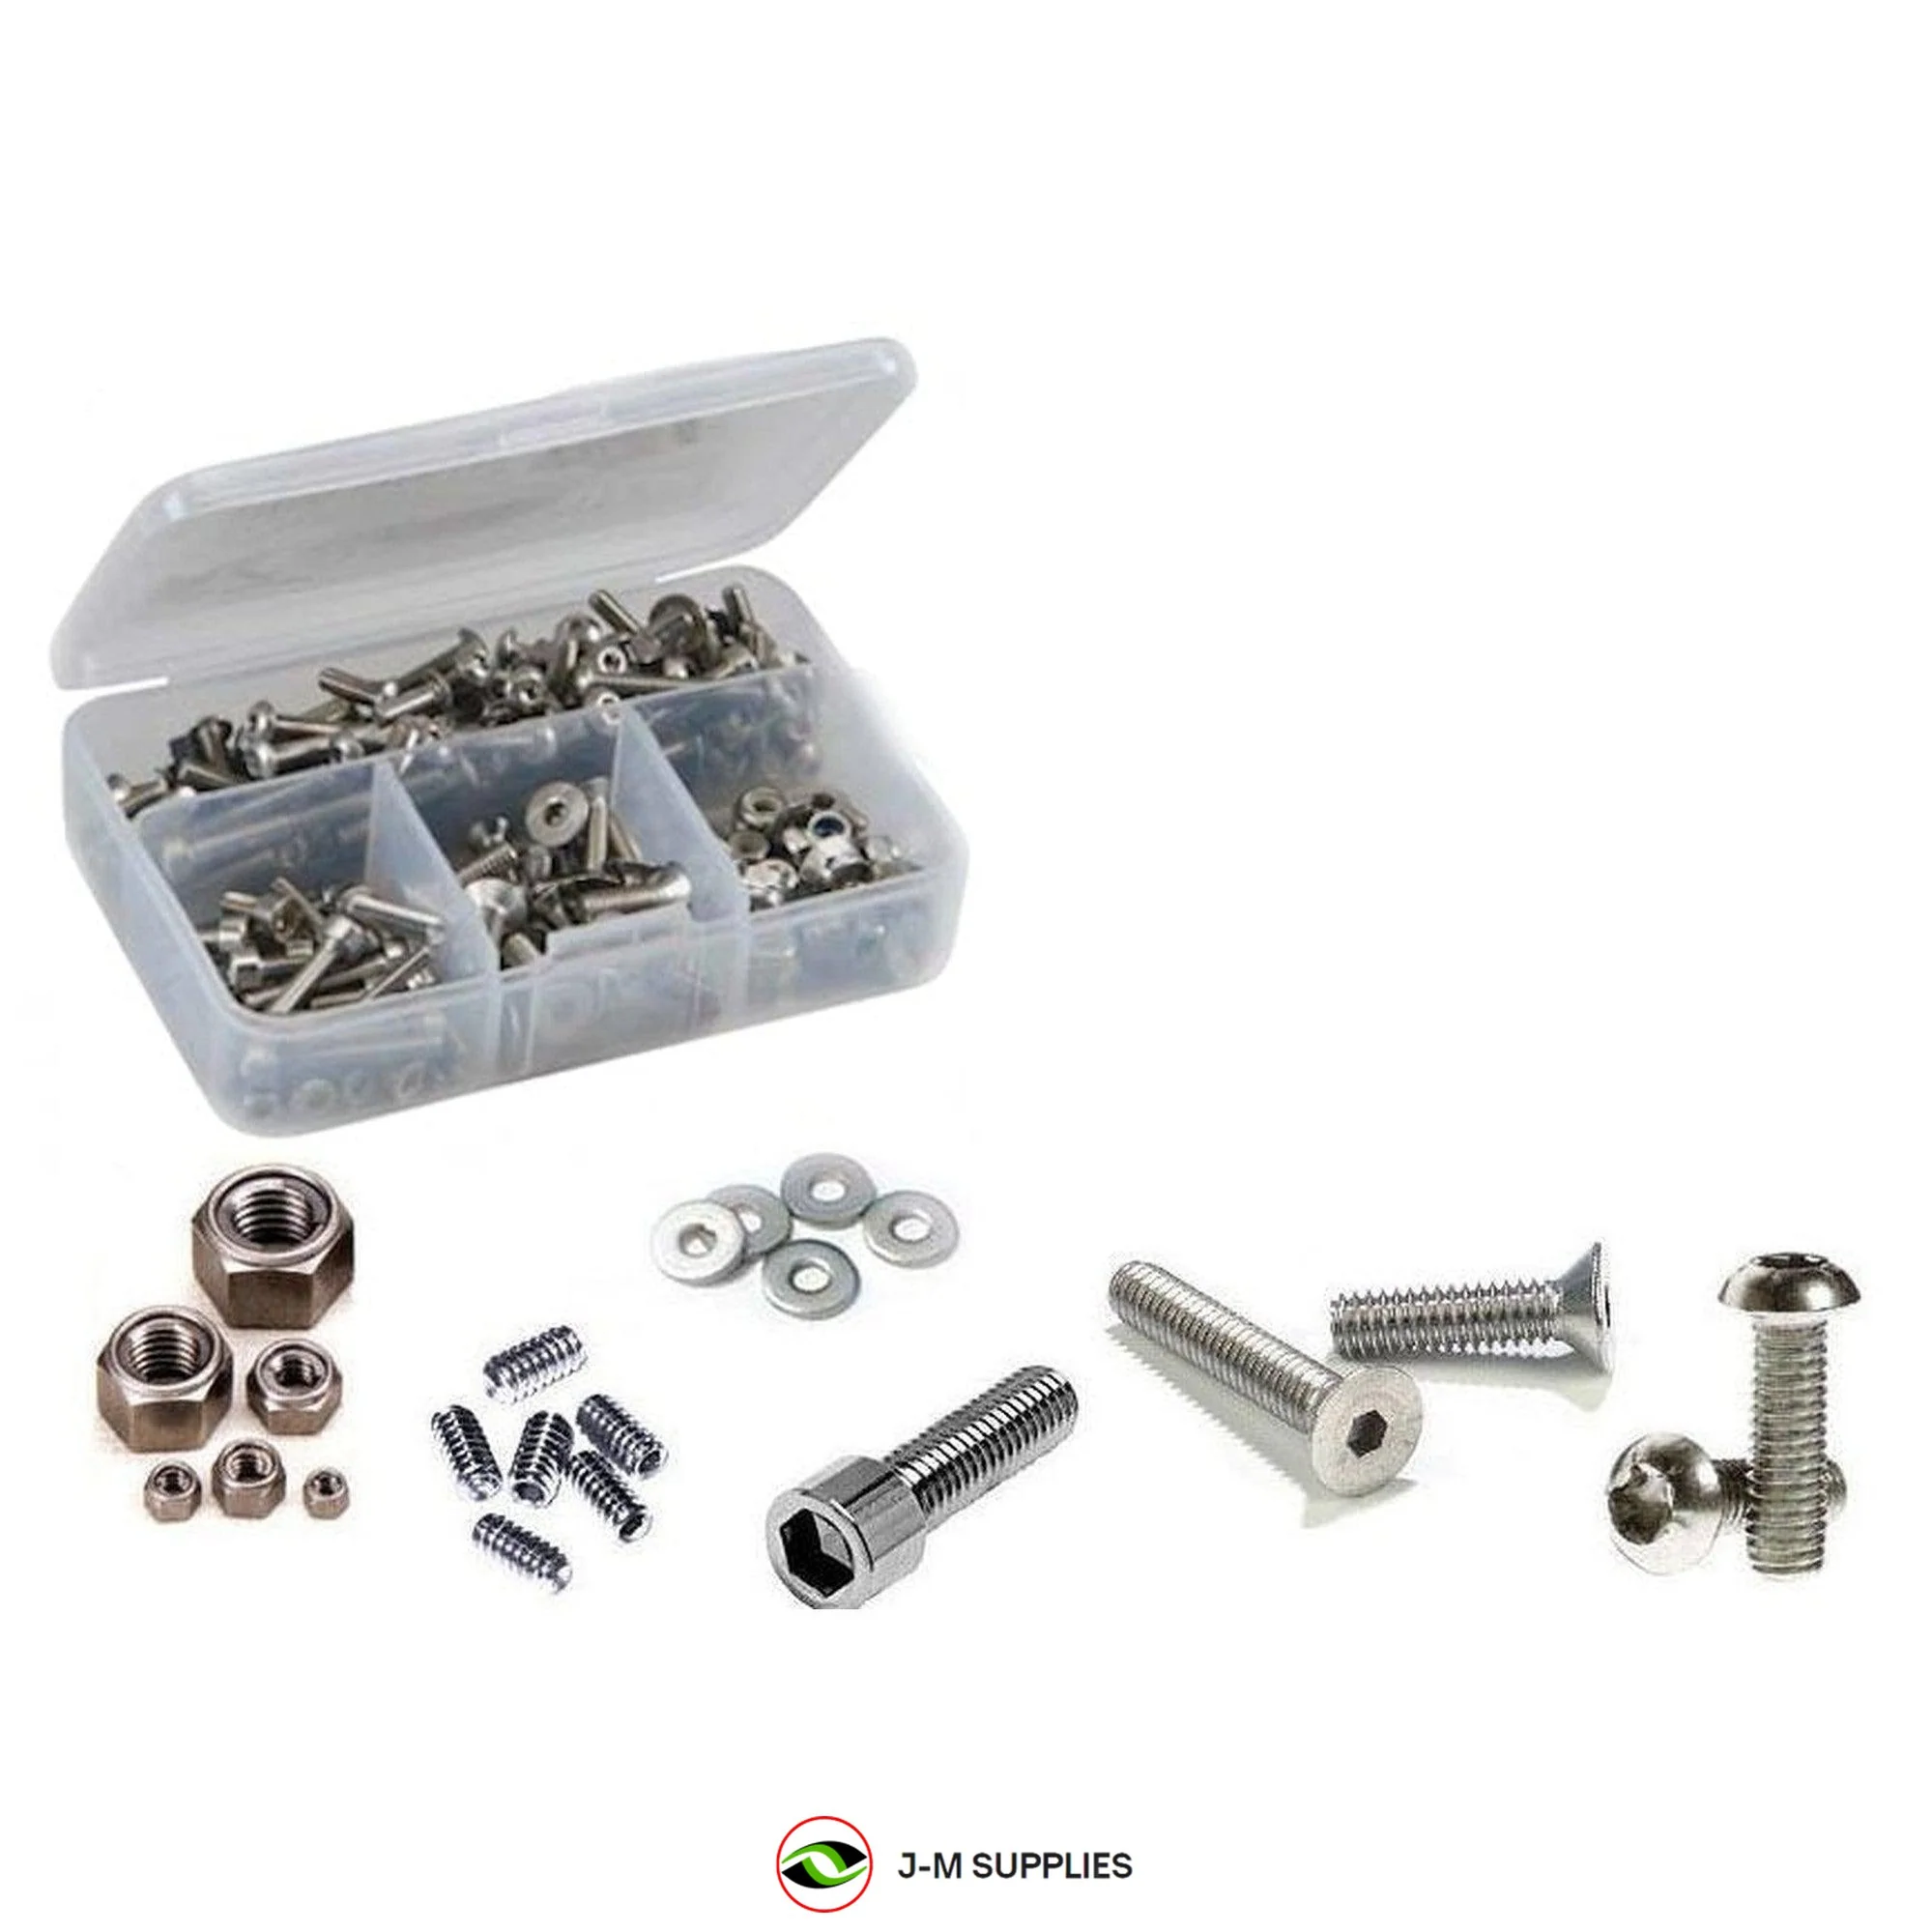 RCScrewZ Stainless Steel Screw Kit efl005 for E-Flite Blade 400 3D - Picture 1 of 12